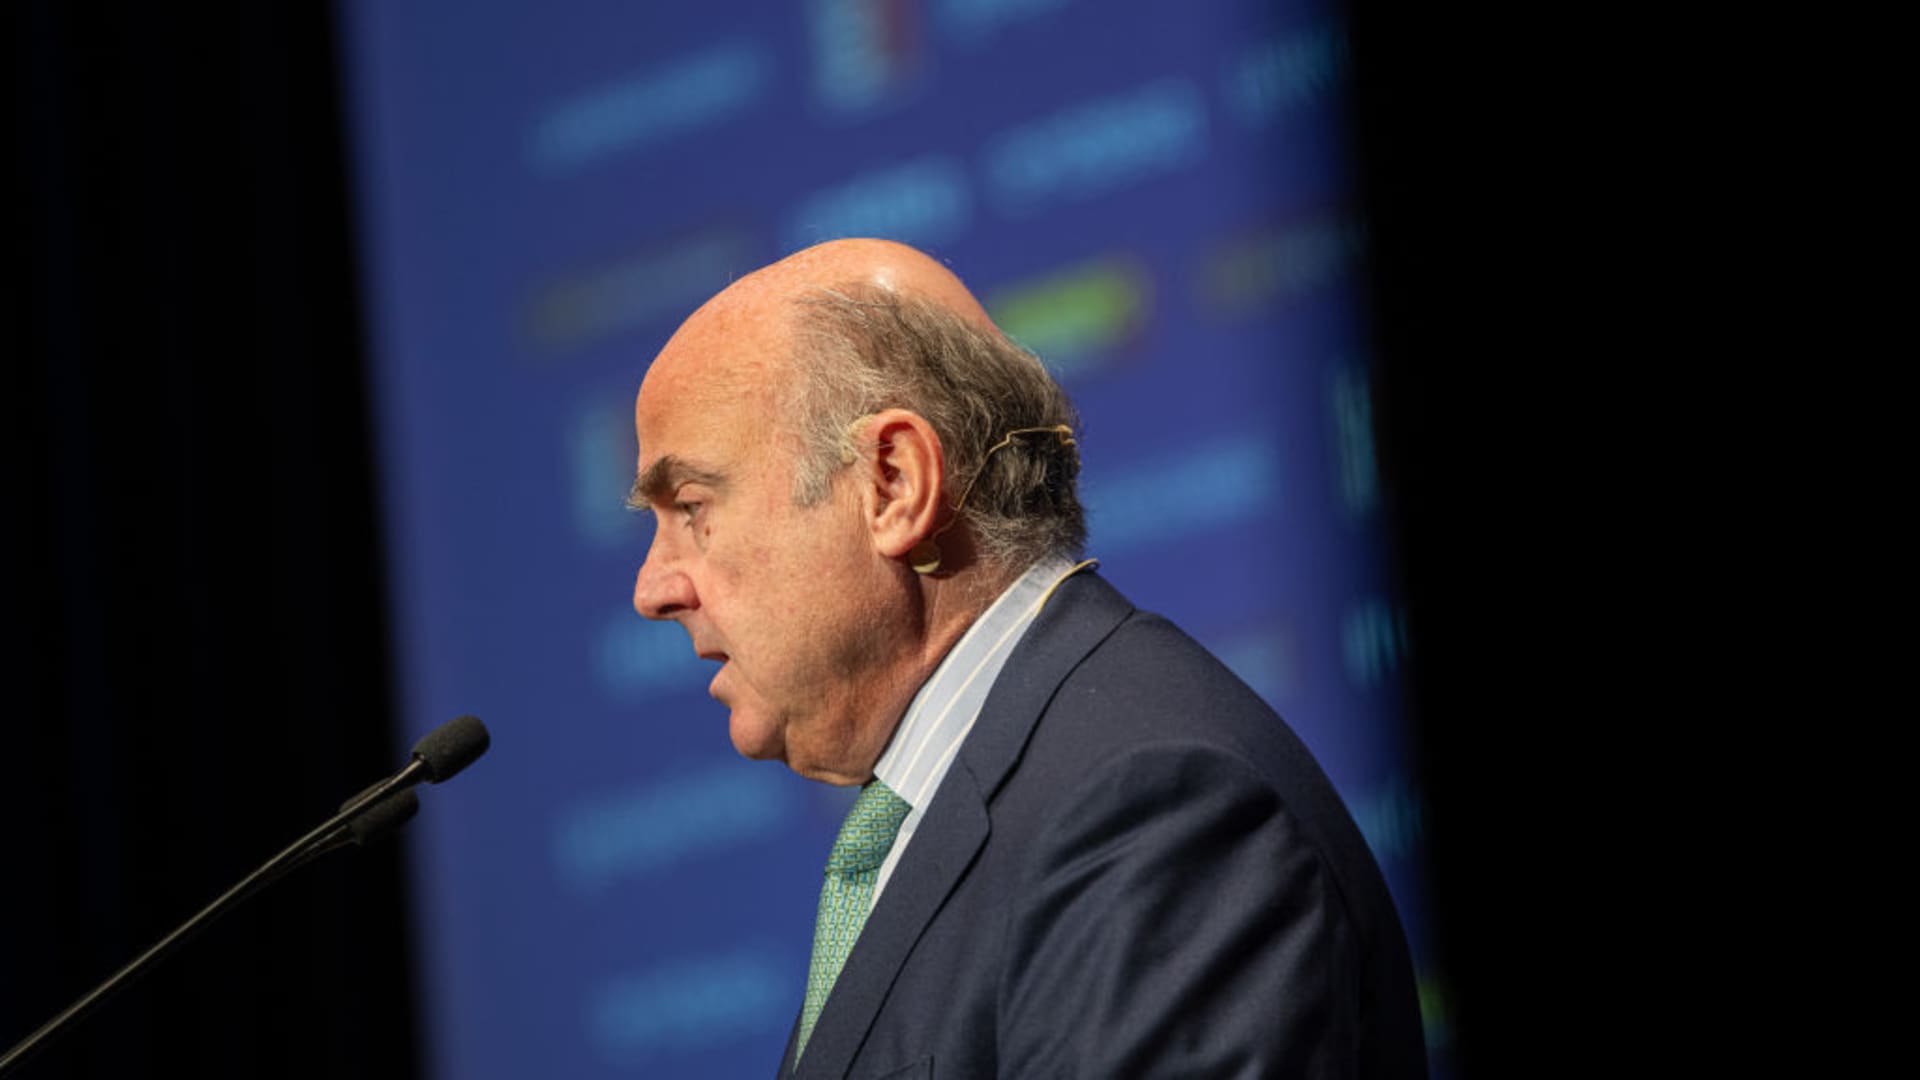 Markets are underestimating geopolitical risk, ECB’s De Guindos says [Video]